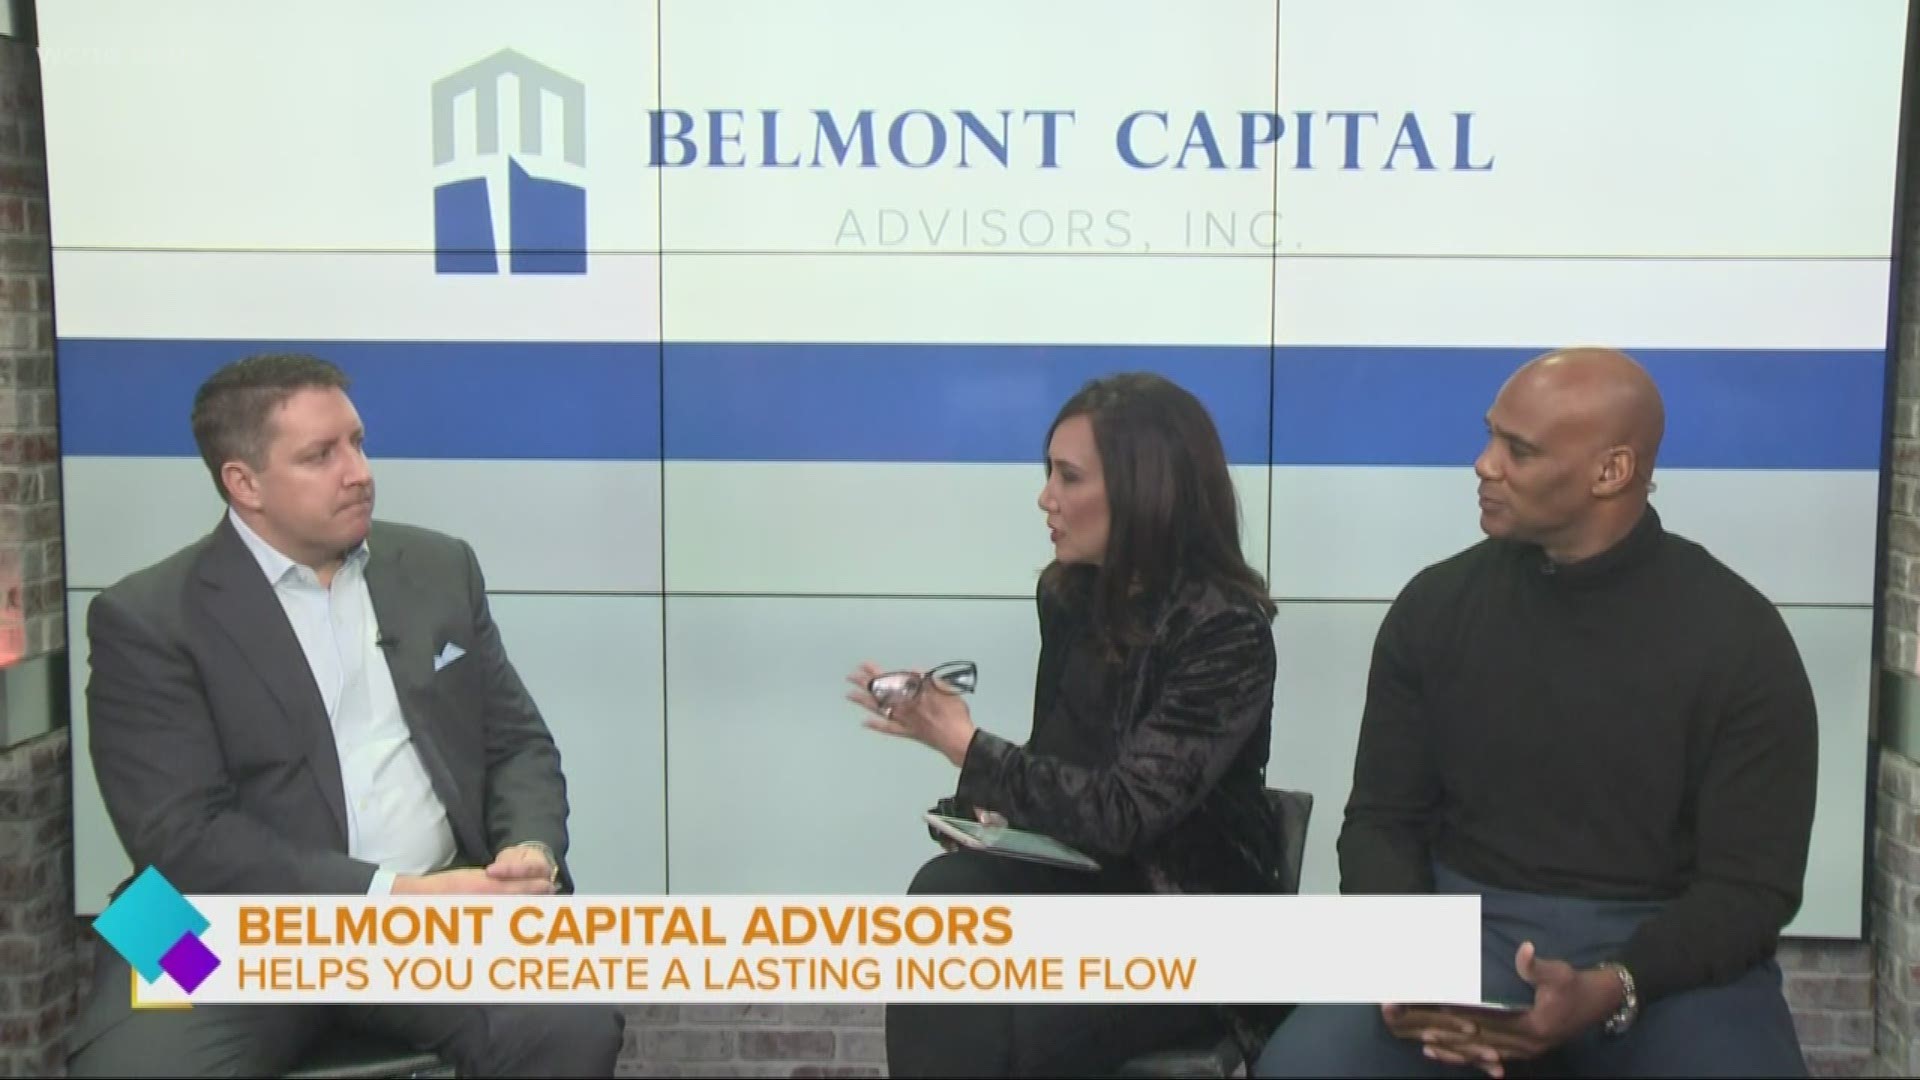 Belmont Capital Advisers recommend taking a serious look at your finances once a year.